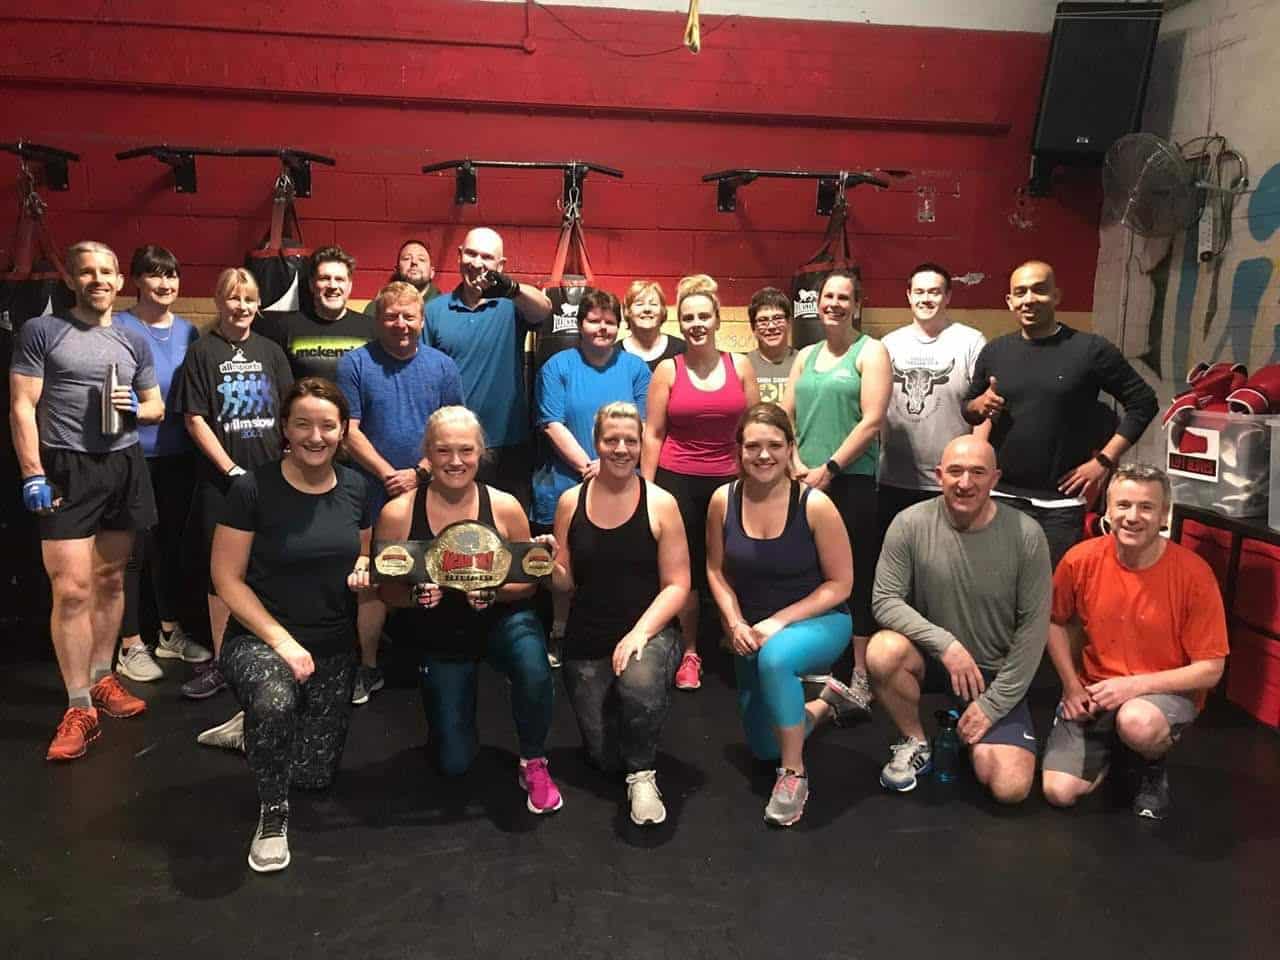 Macclesfield Group Personal Training and weight loss specialist gym - fun in the gym